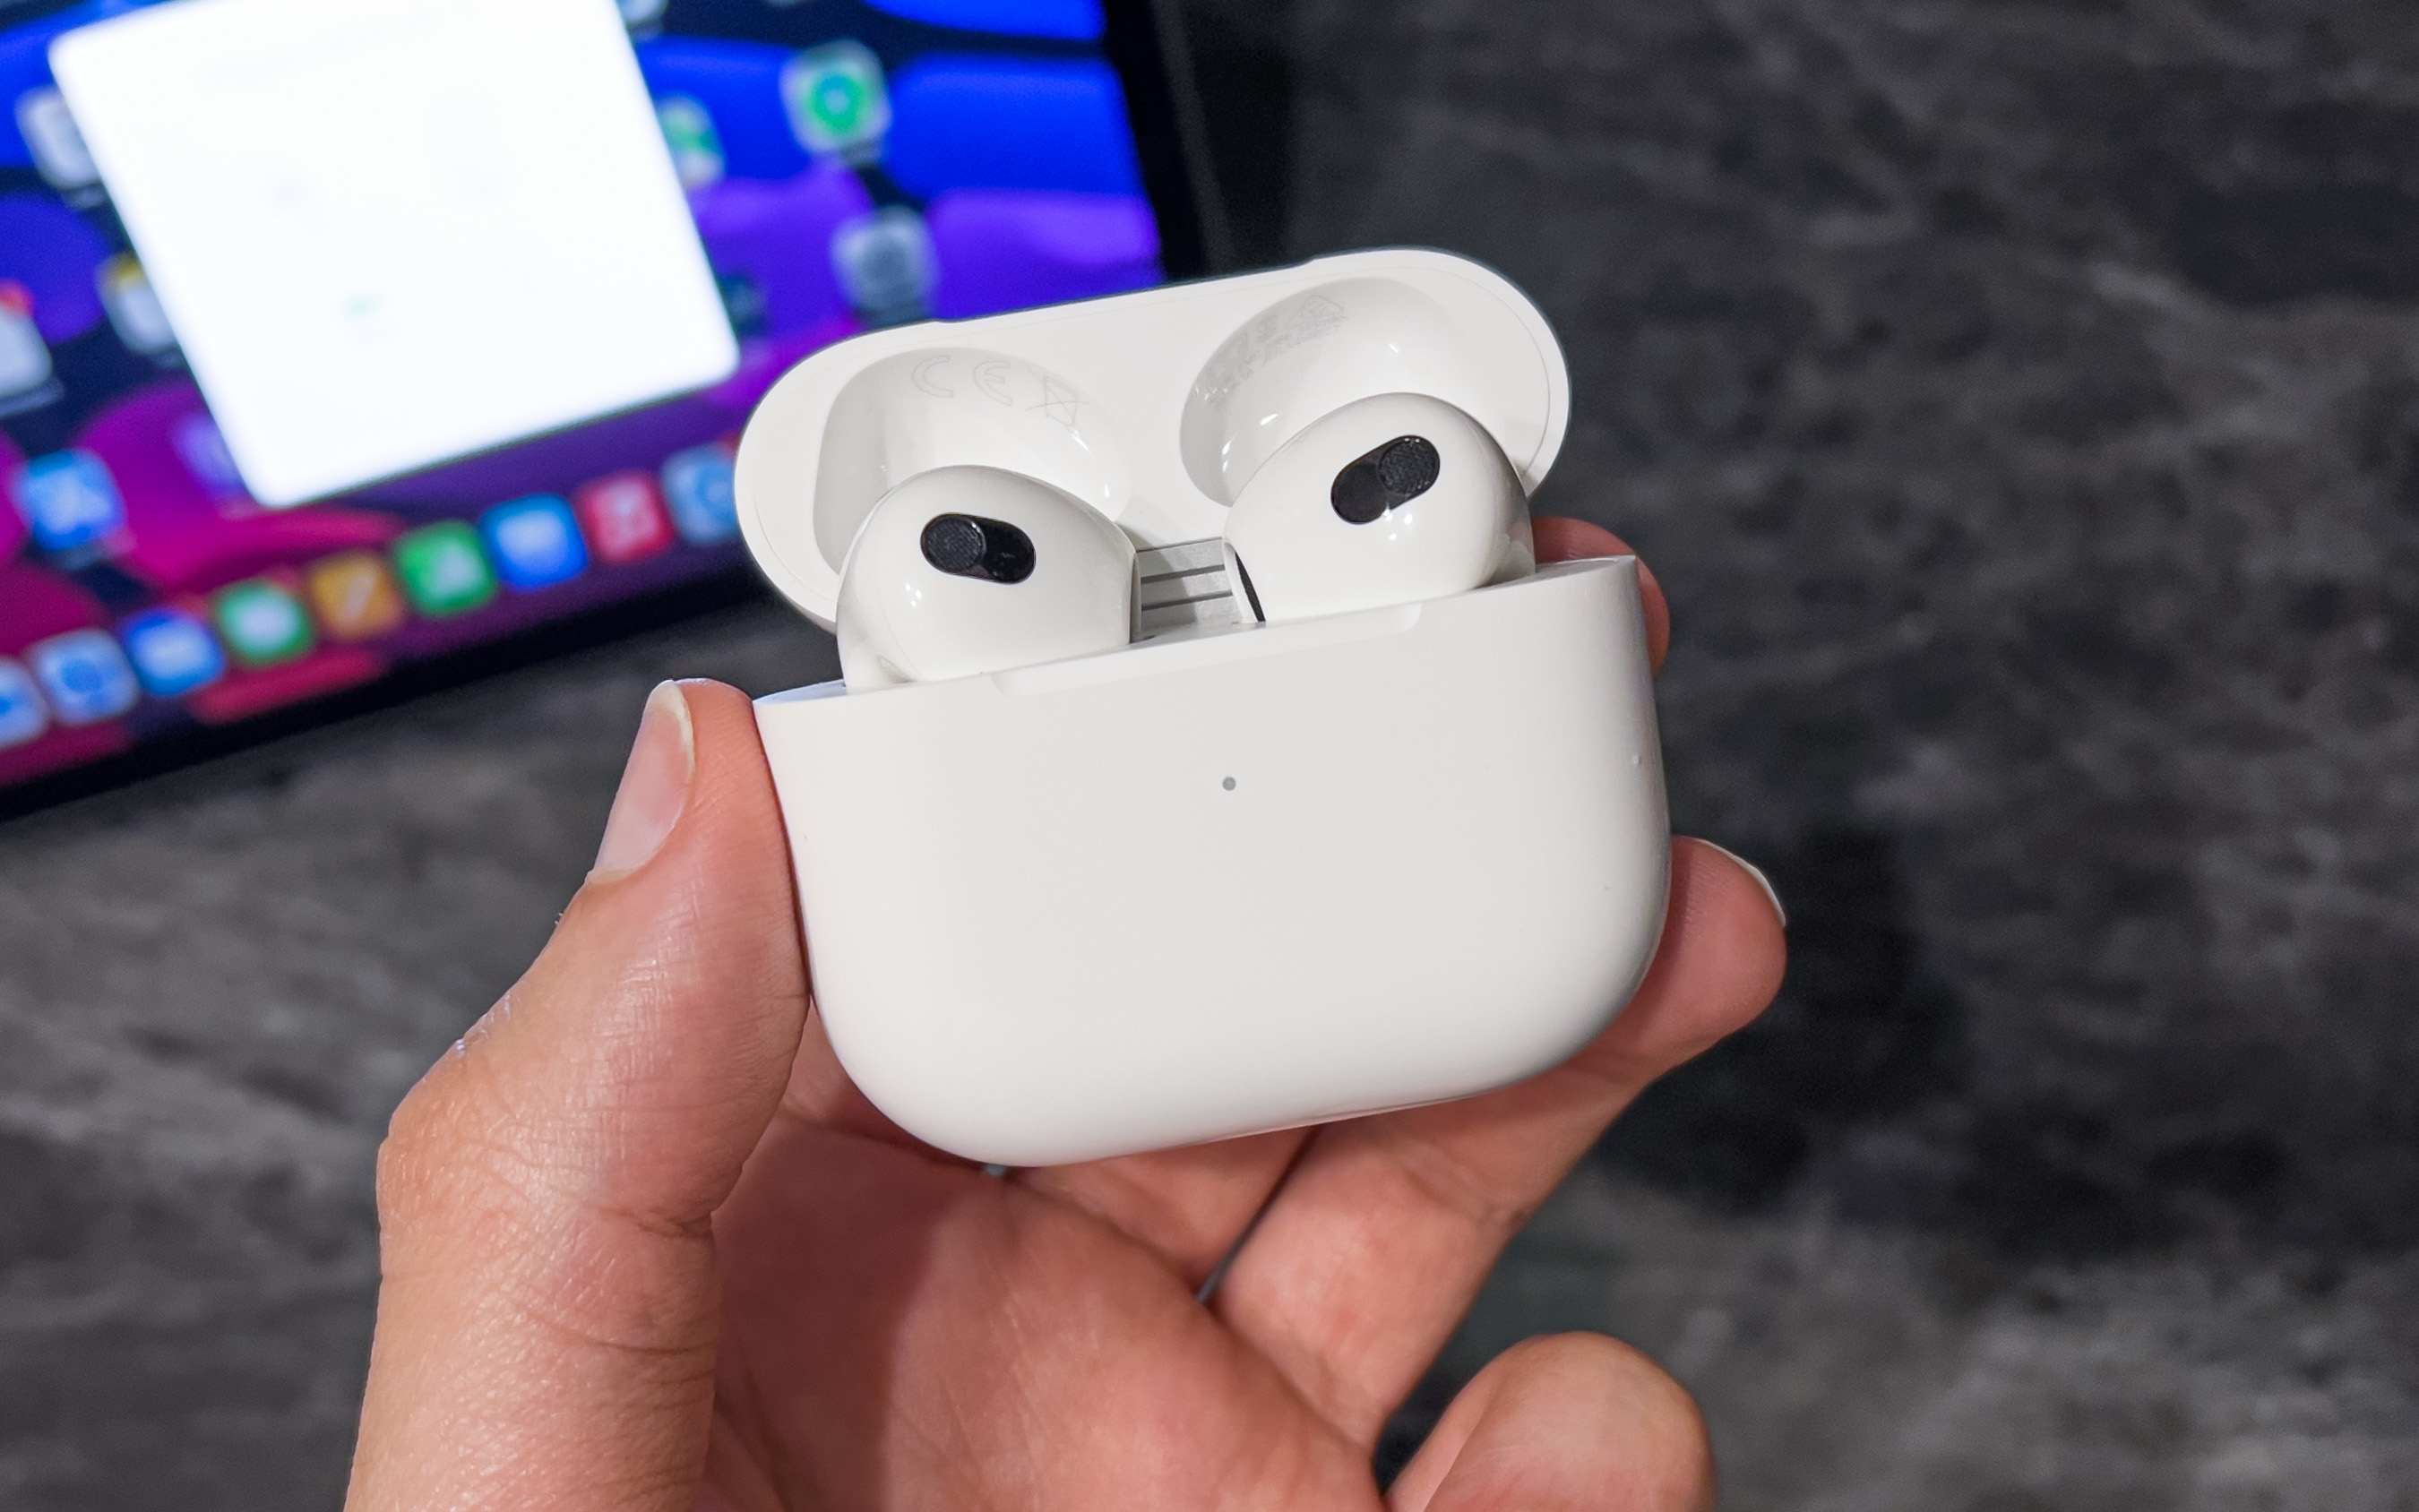 Apple rolling out new firmware version 4C170 for AirPods 3 - 9to5Mac